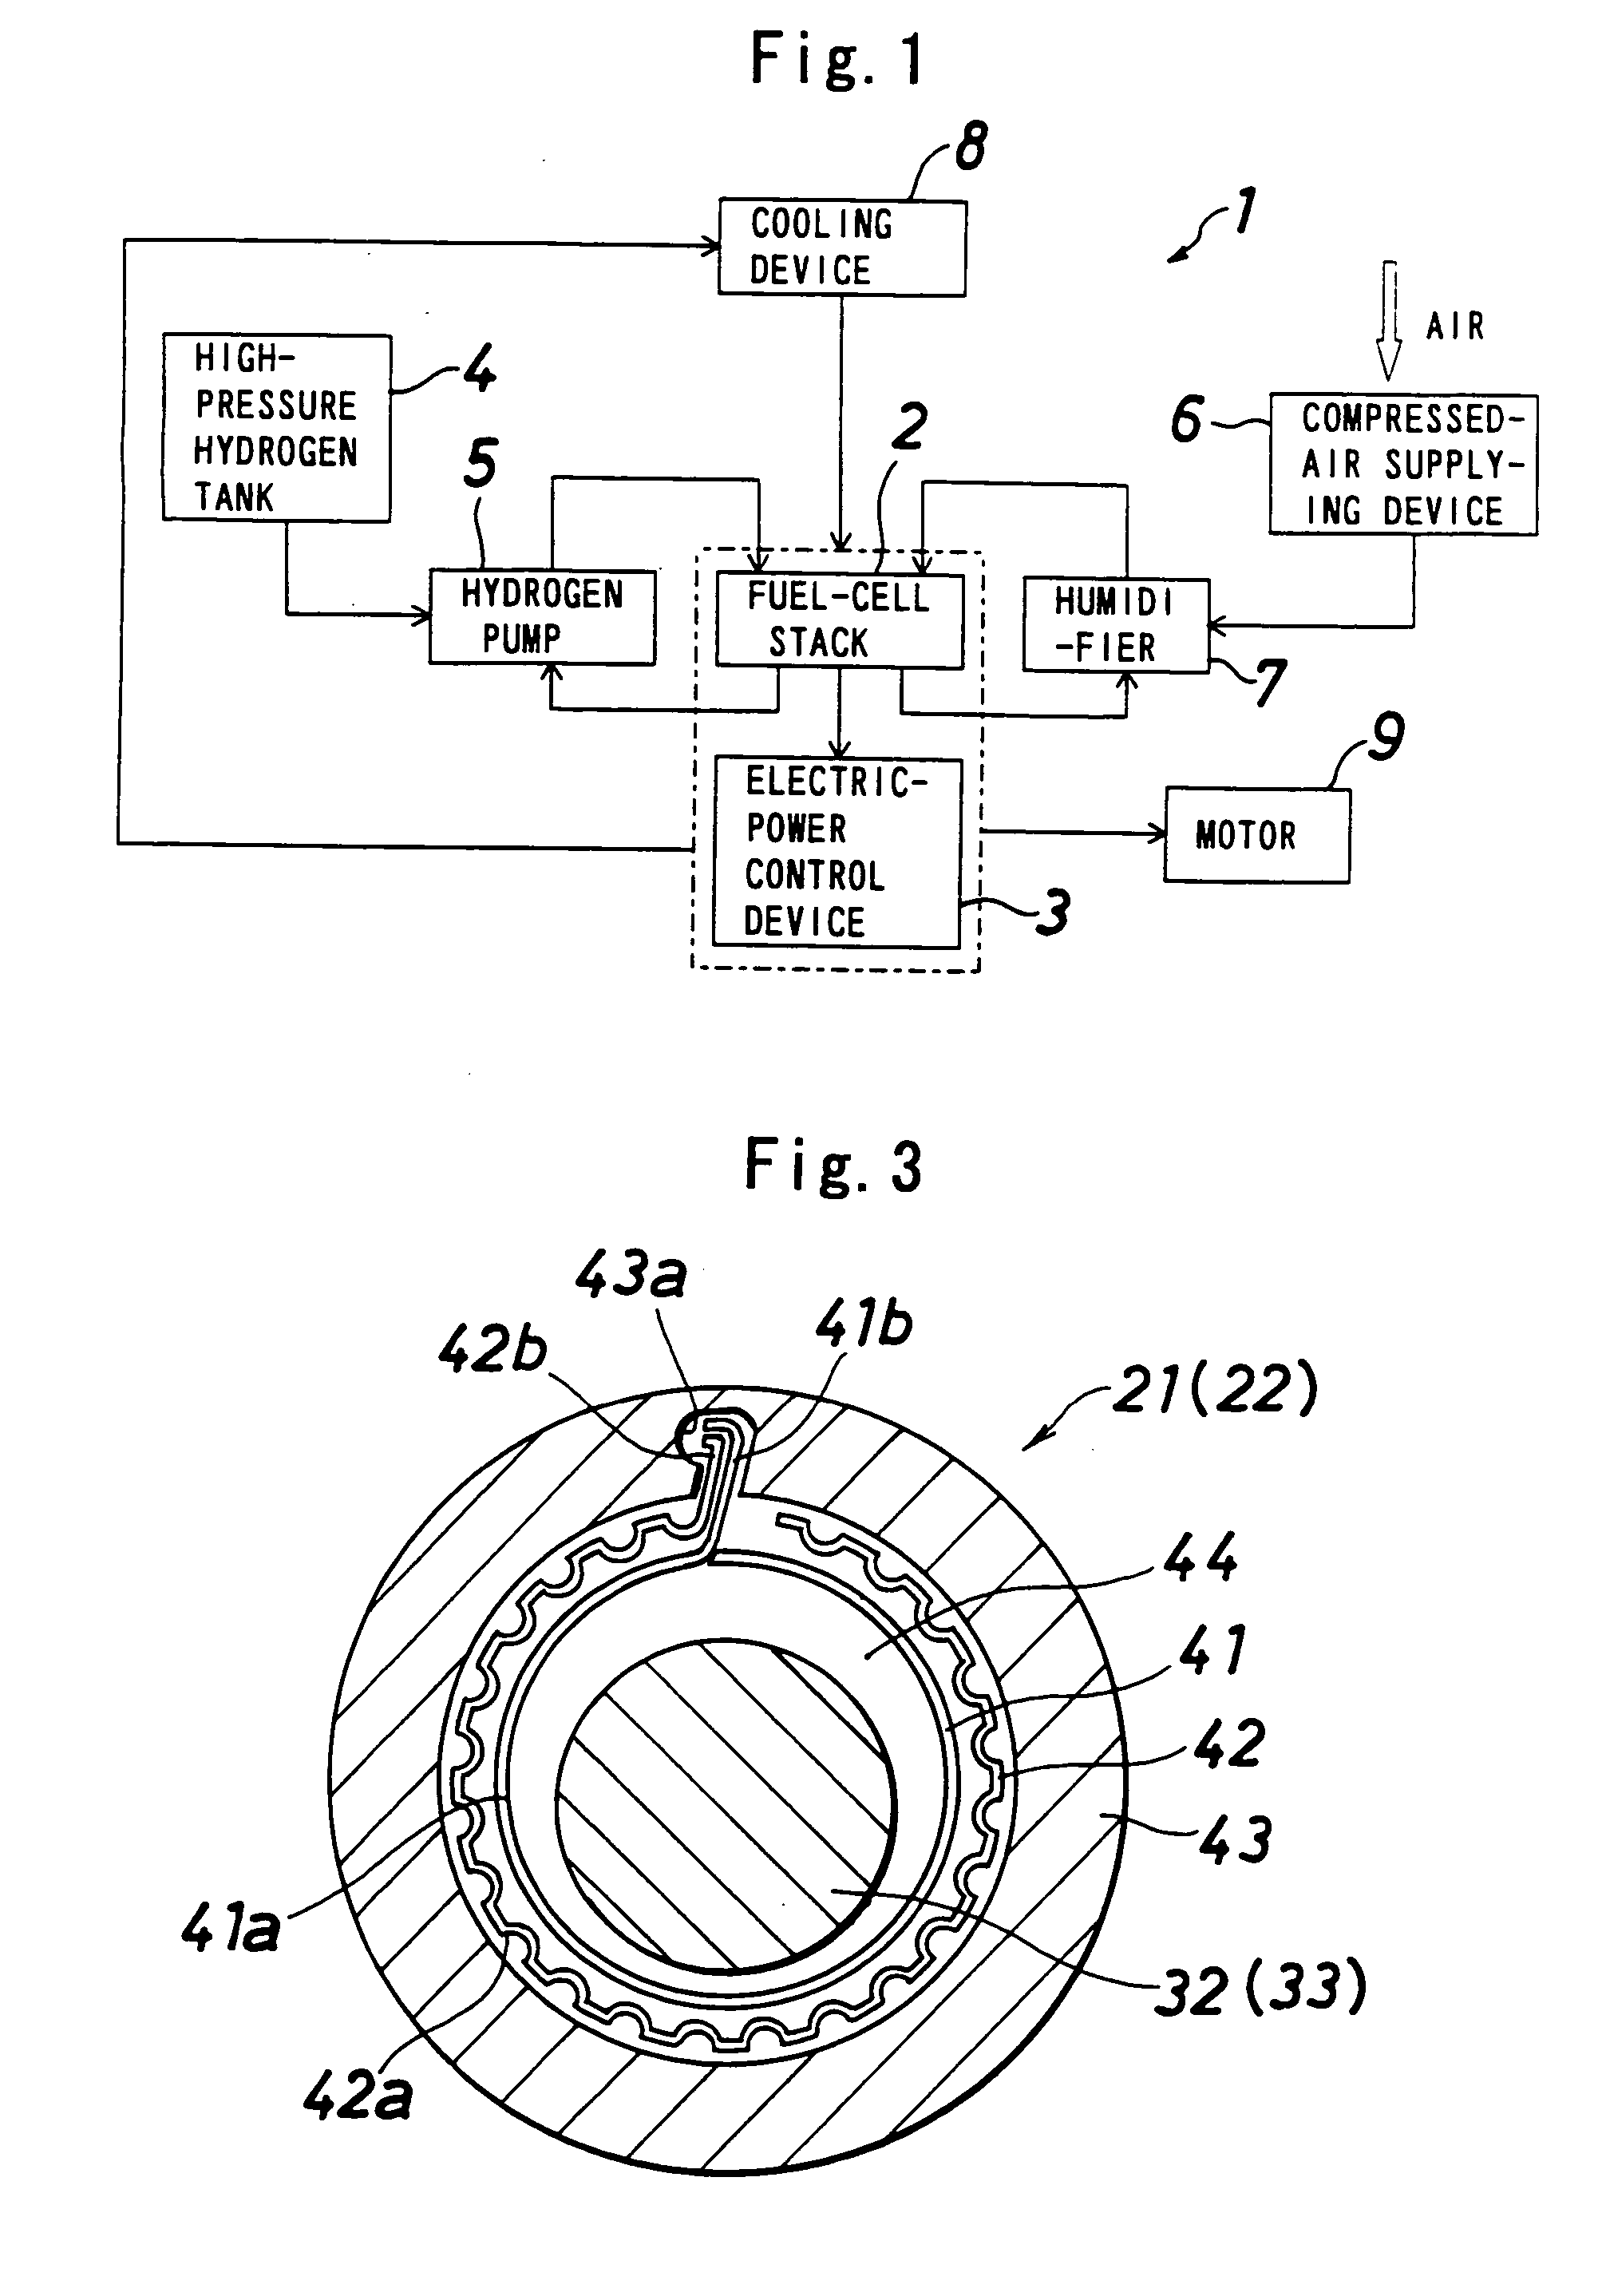 Fuel-cell compressed-air supplying device